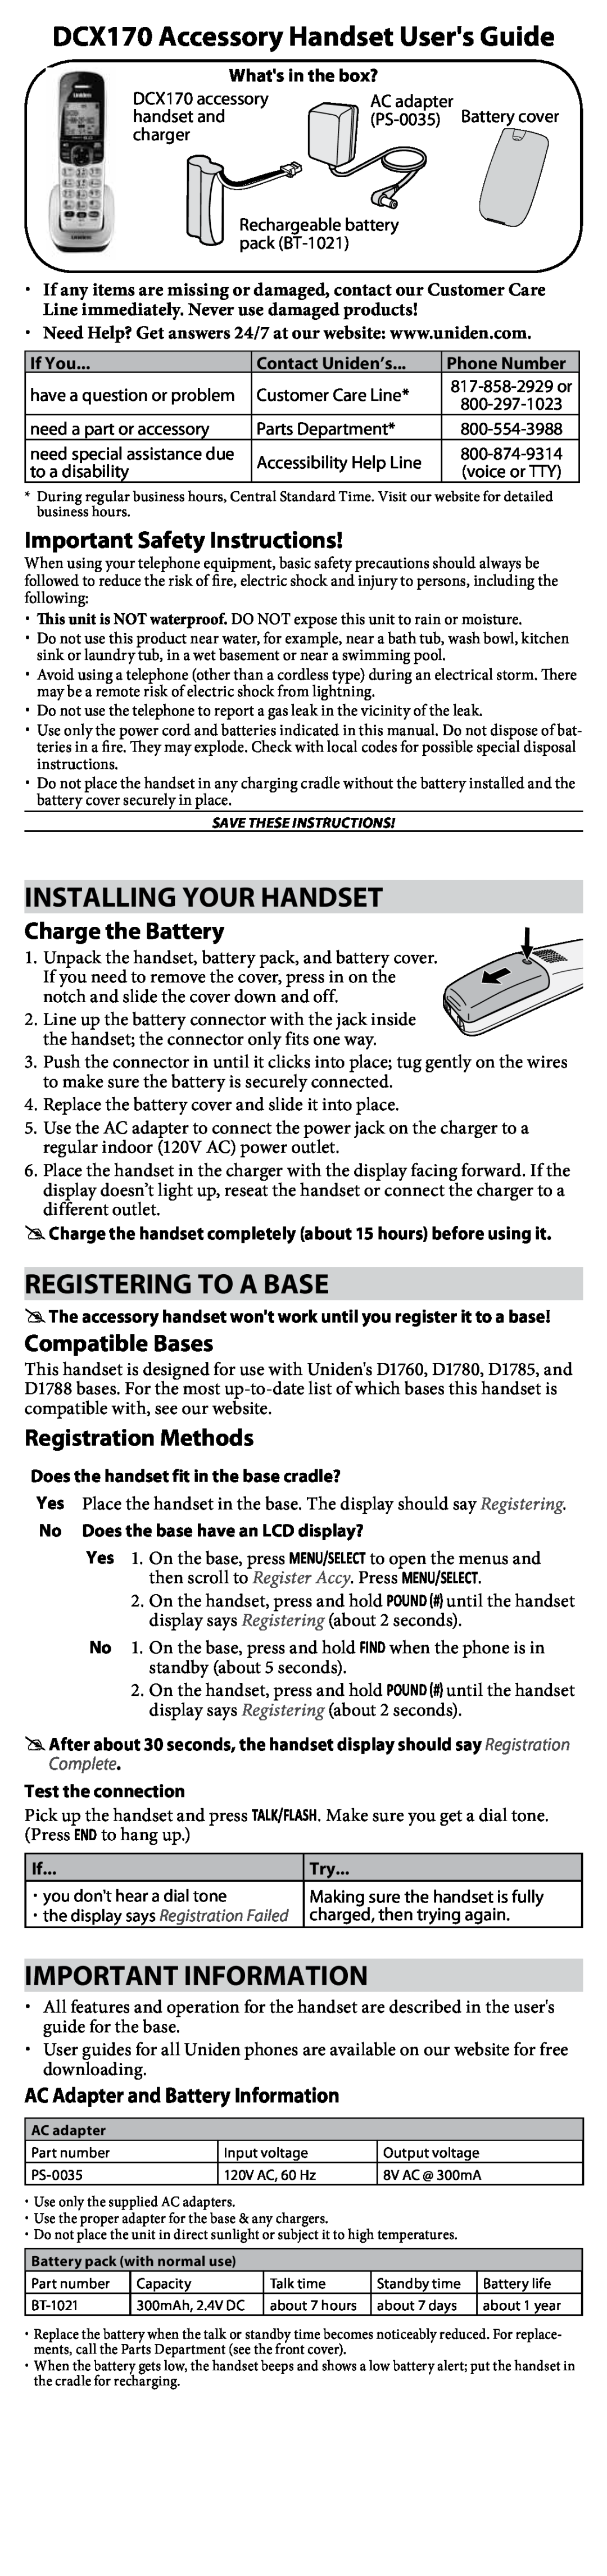 Uniden important safety instructions AC Adapter and Battery Information, DCX170 Accessory Handset Users Guide 